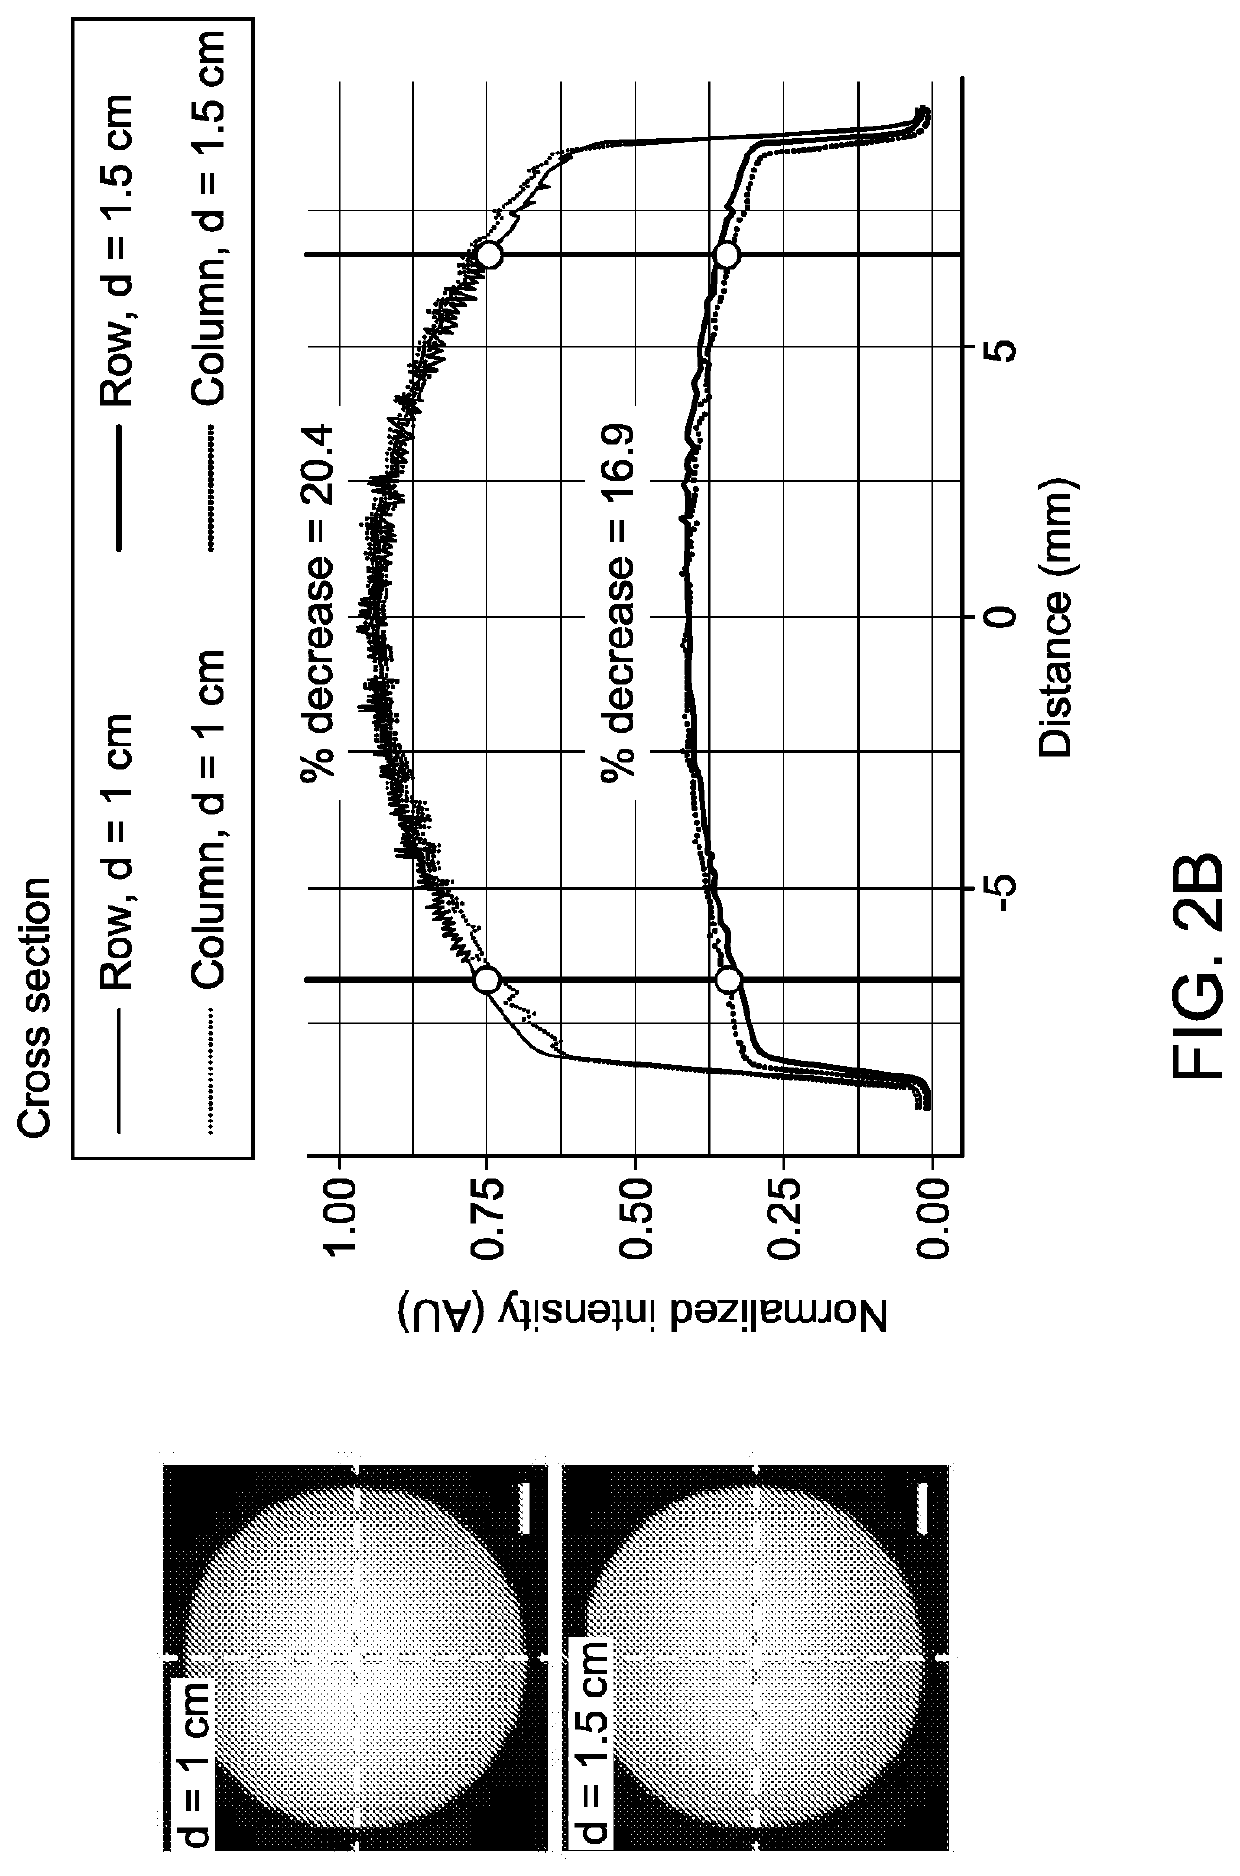 Illumination device for spatial and temporal control of morphogen signaling in cell cultures